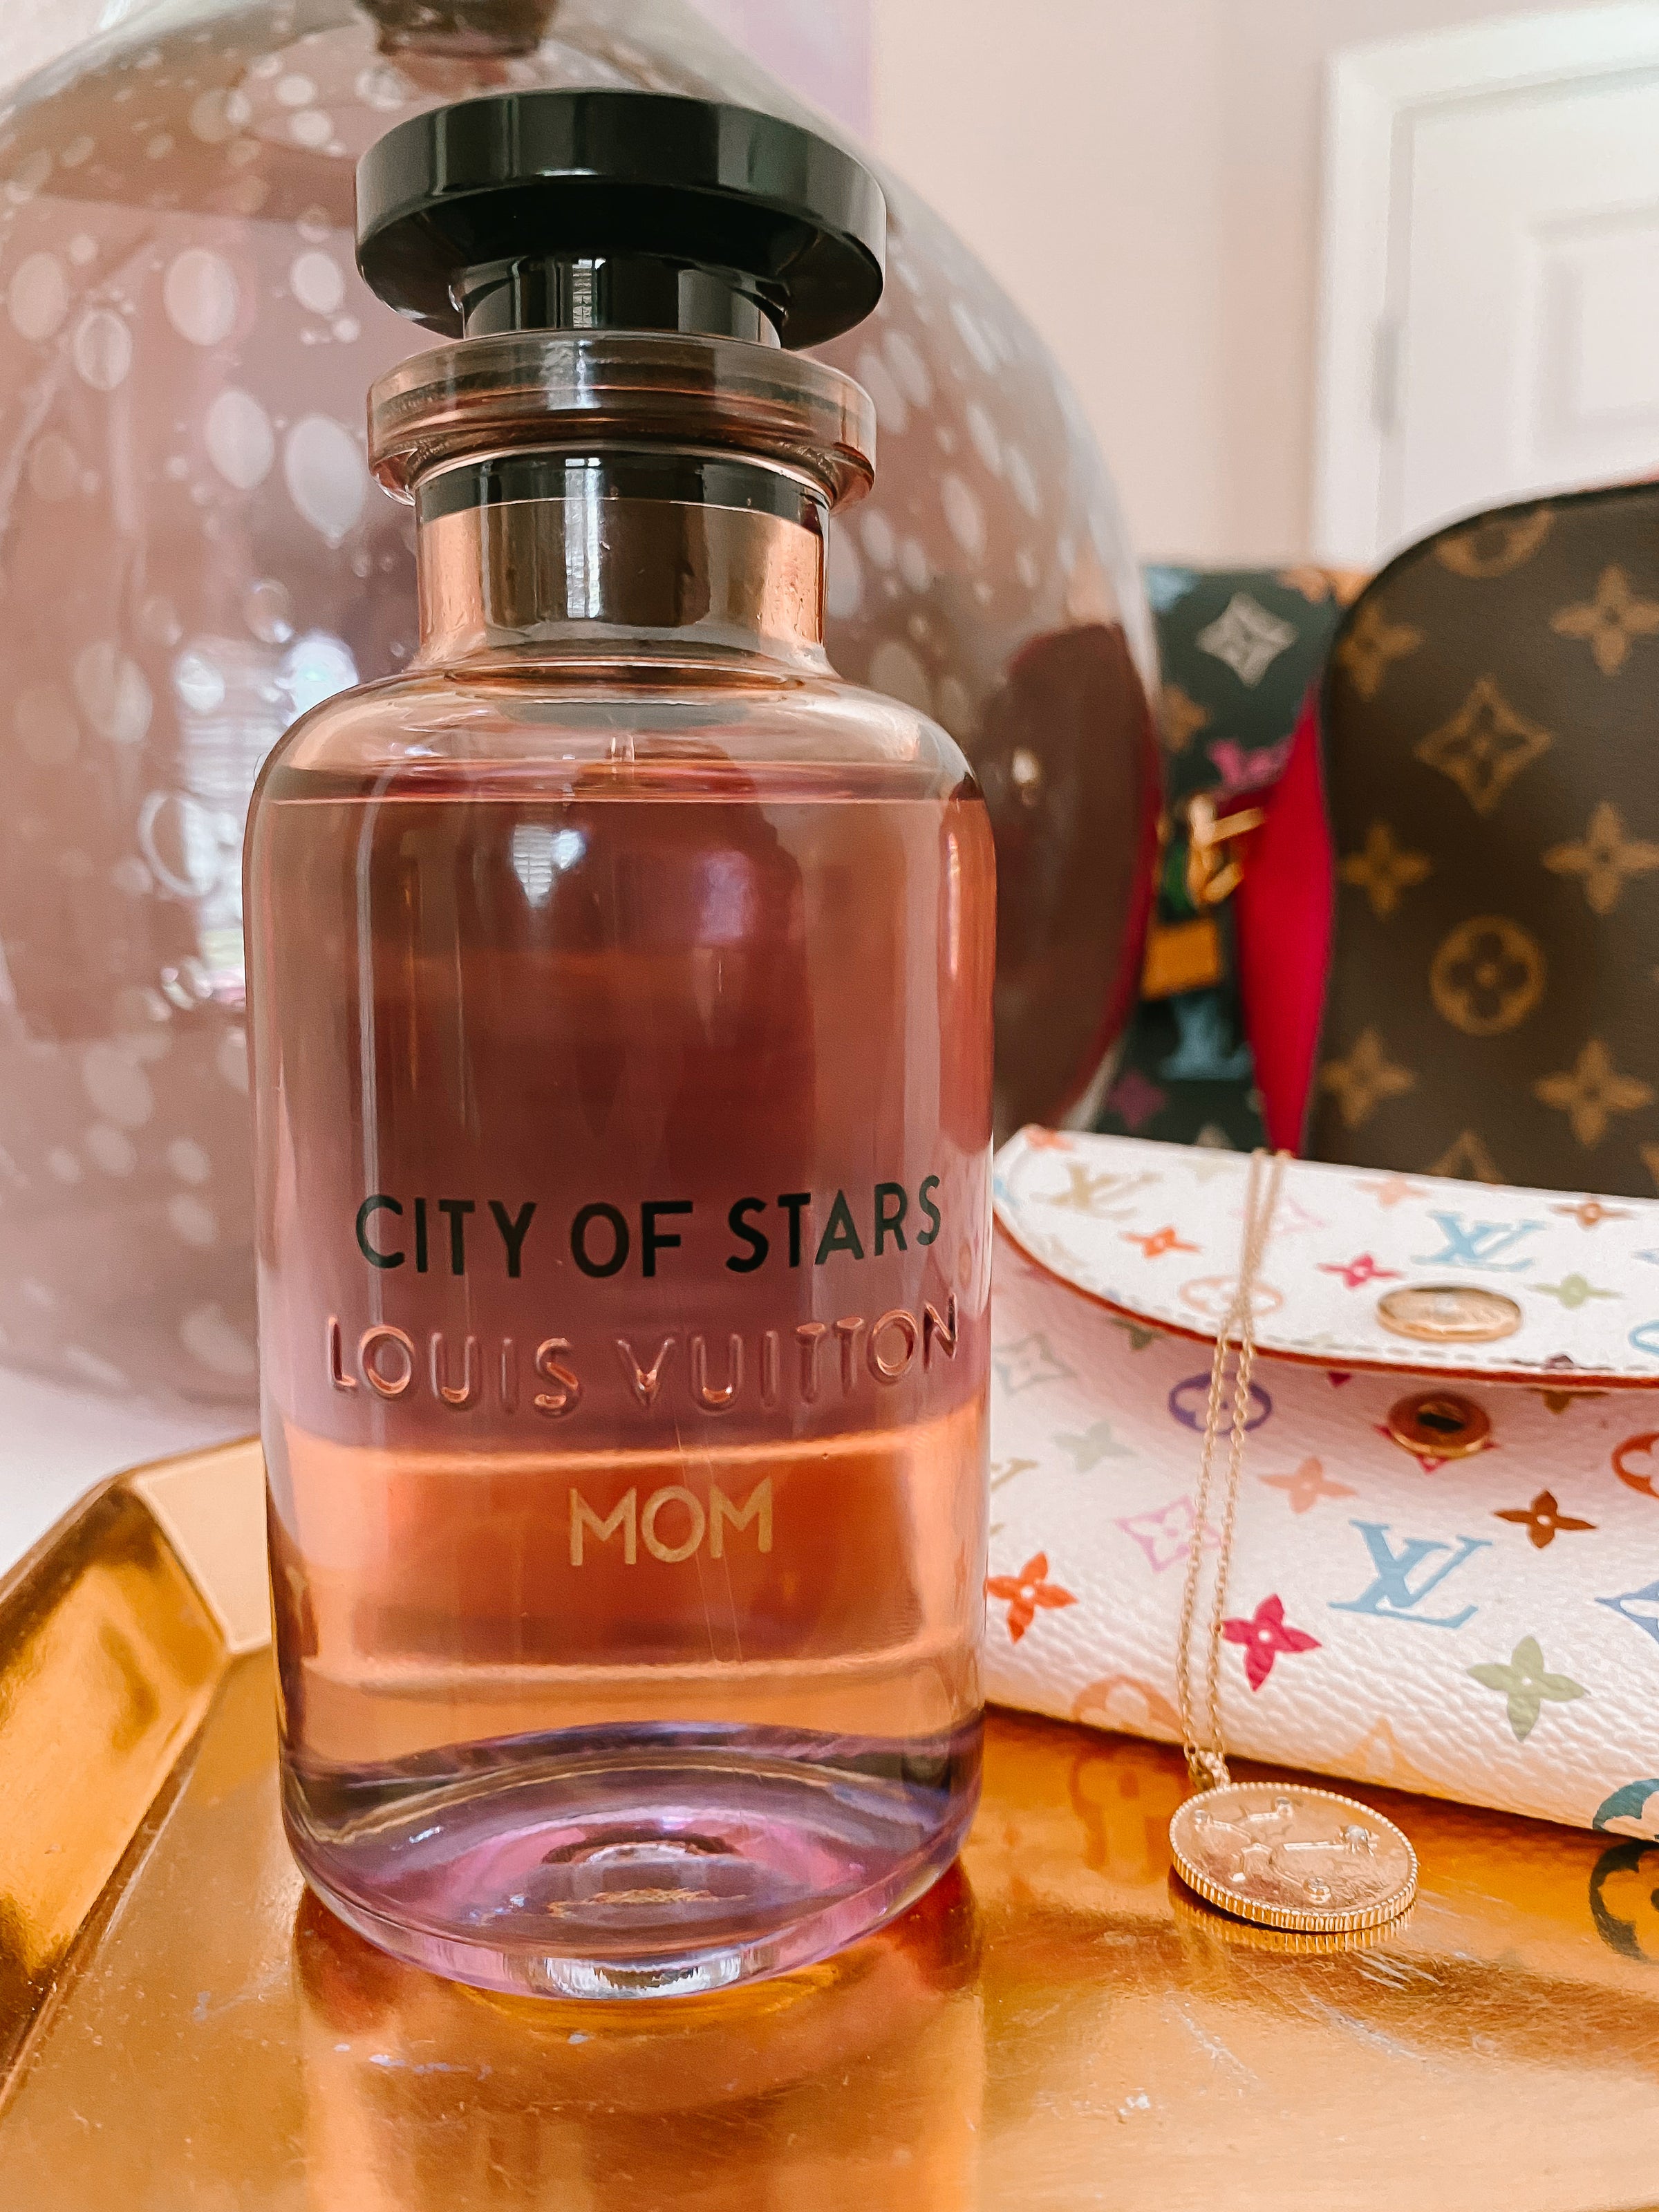 City of Stars: Louis Vuitton Places LA on a Pedestal With Their Latest  Release